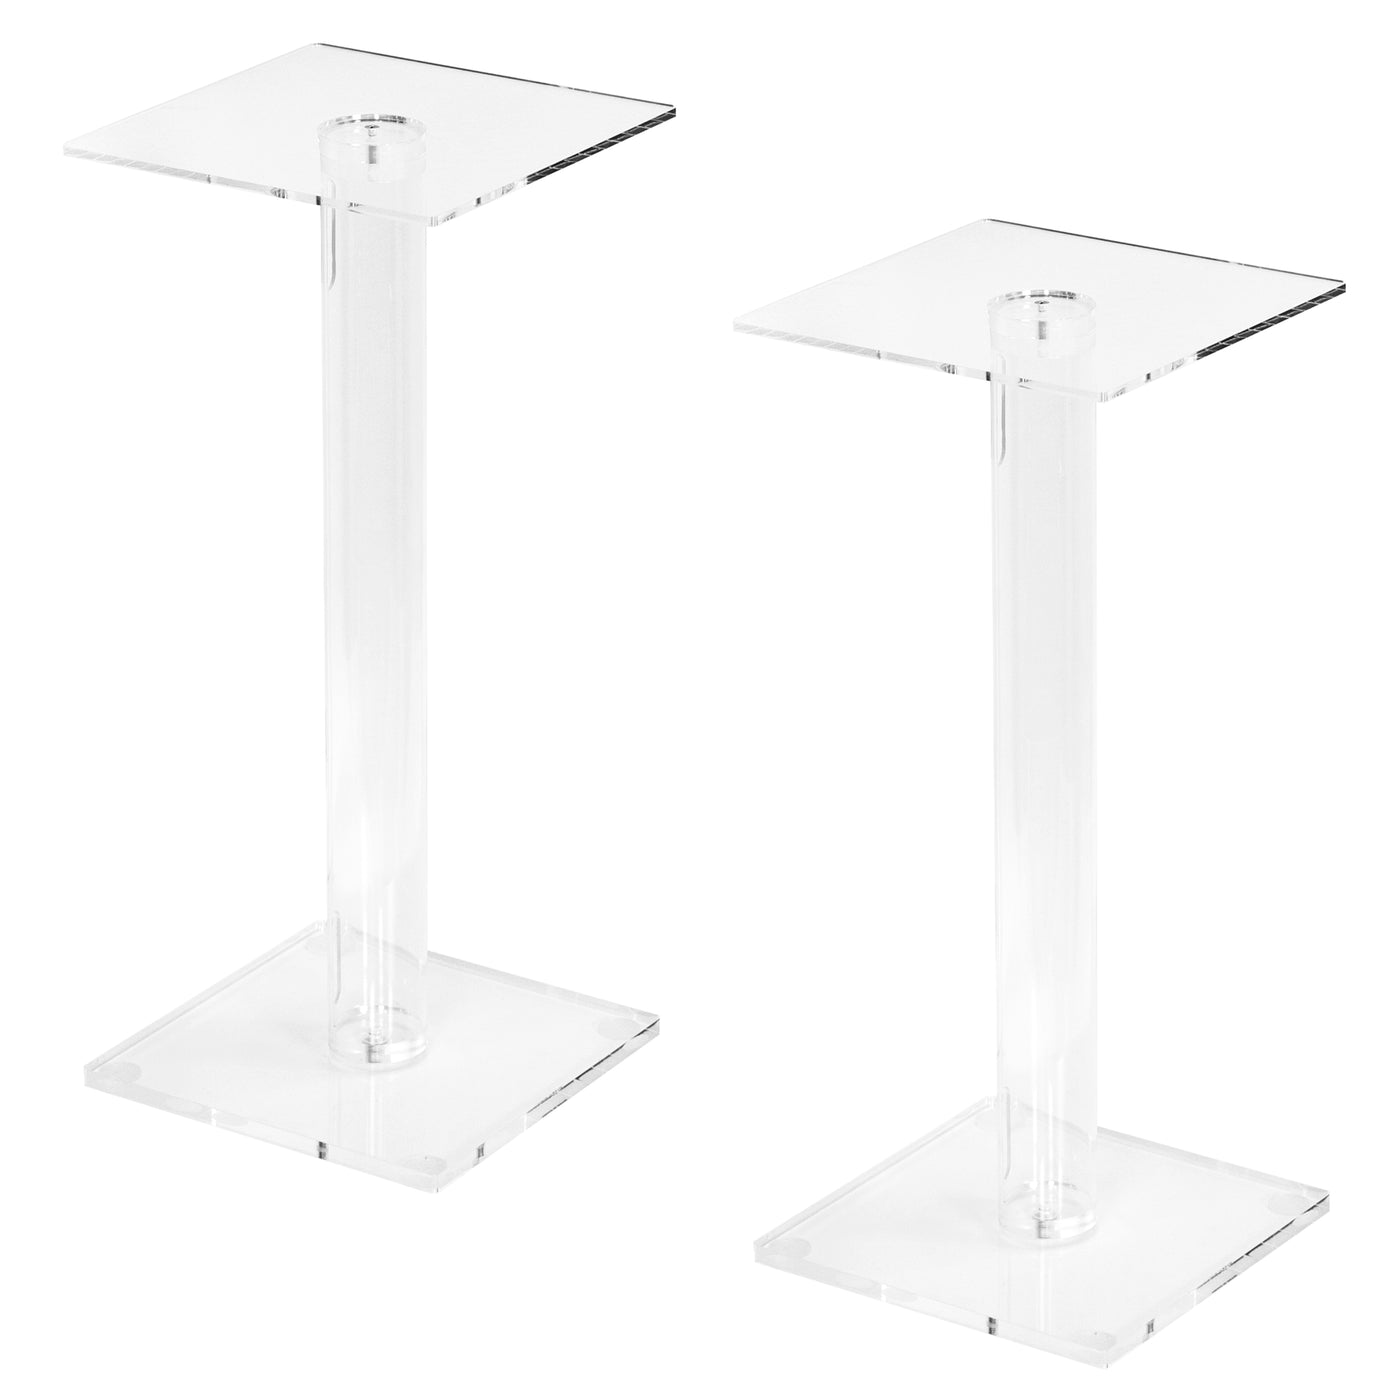 Premium Acrylic Speaker Floor Stands, Modern Look, Features Cable Management and Floor Protection Pads, 2 Pack